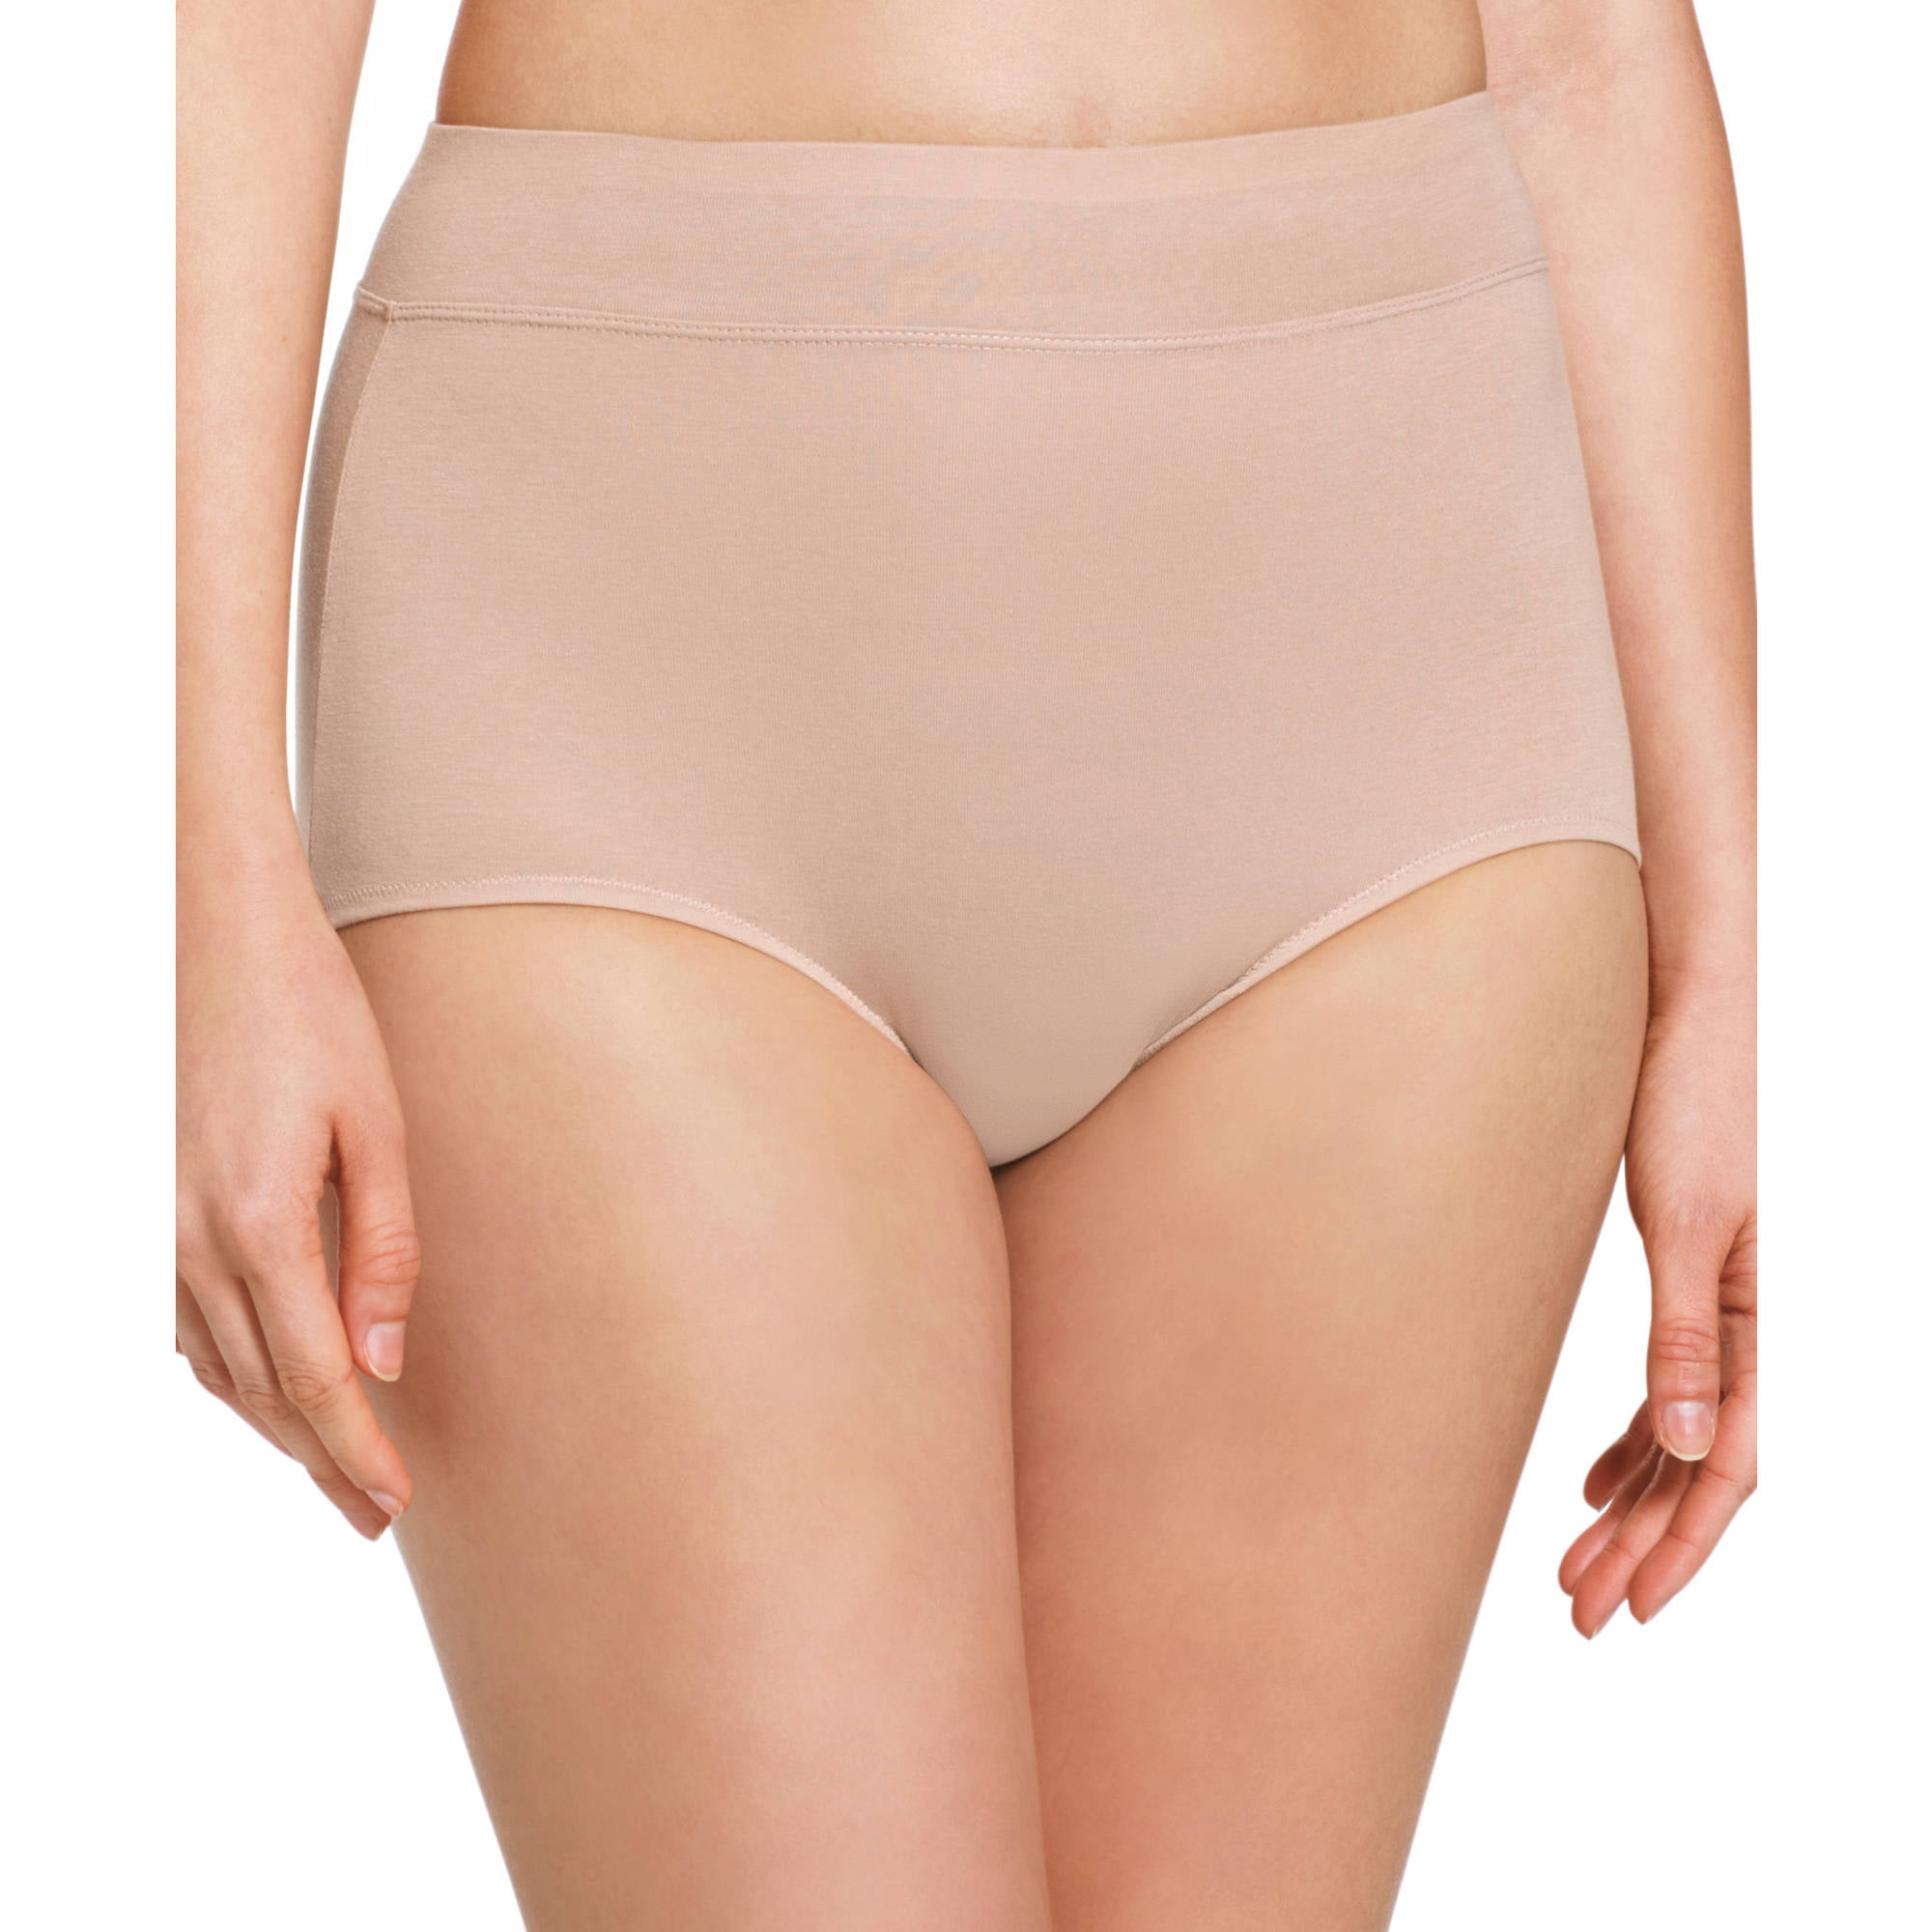 no muffin top cotton brief panties 